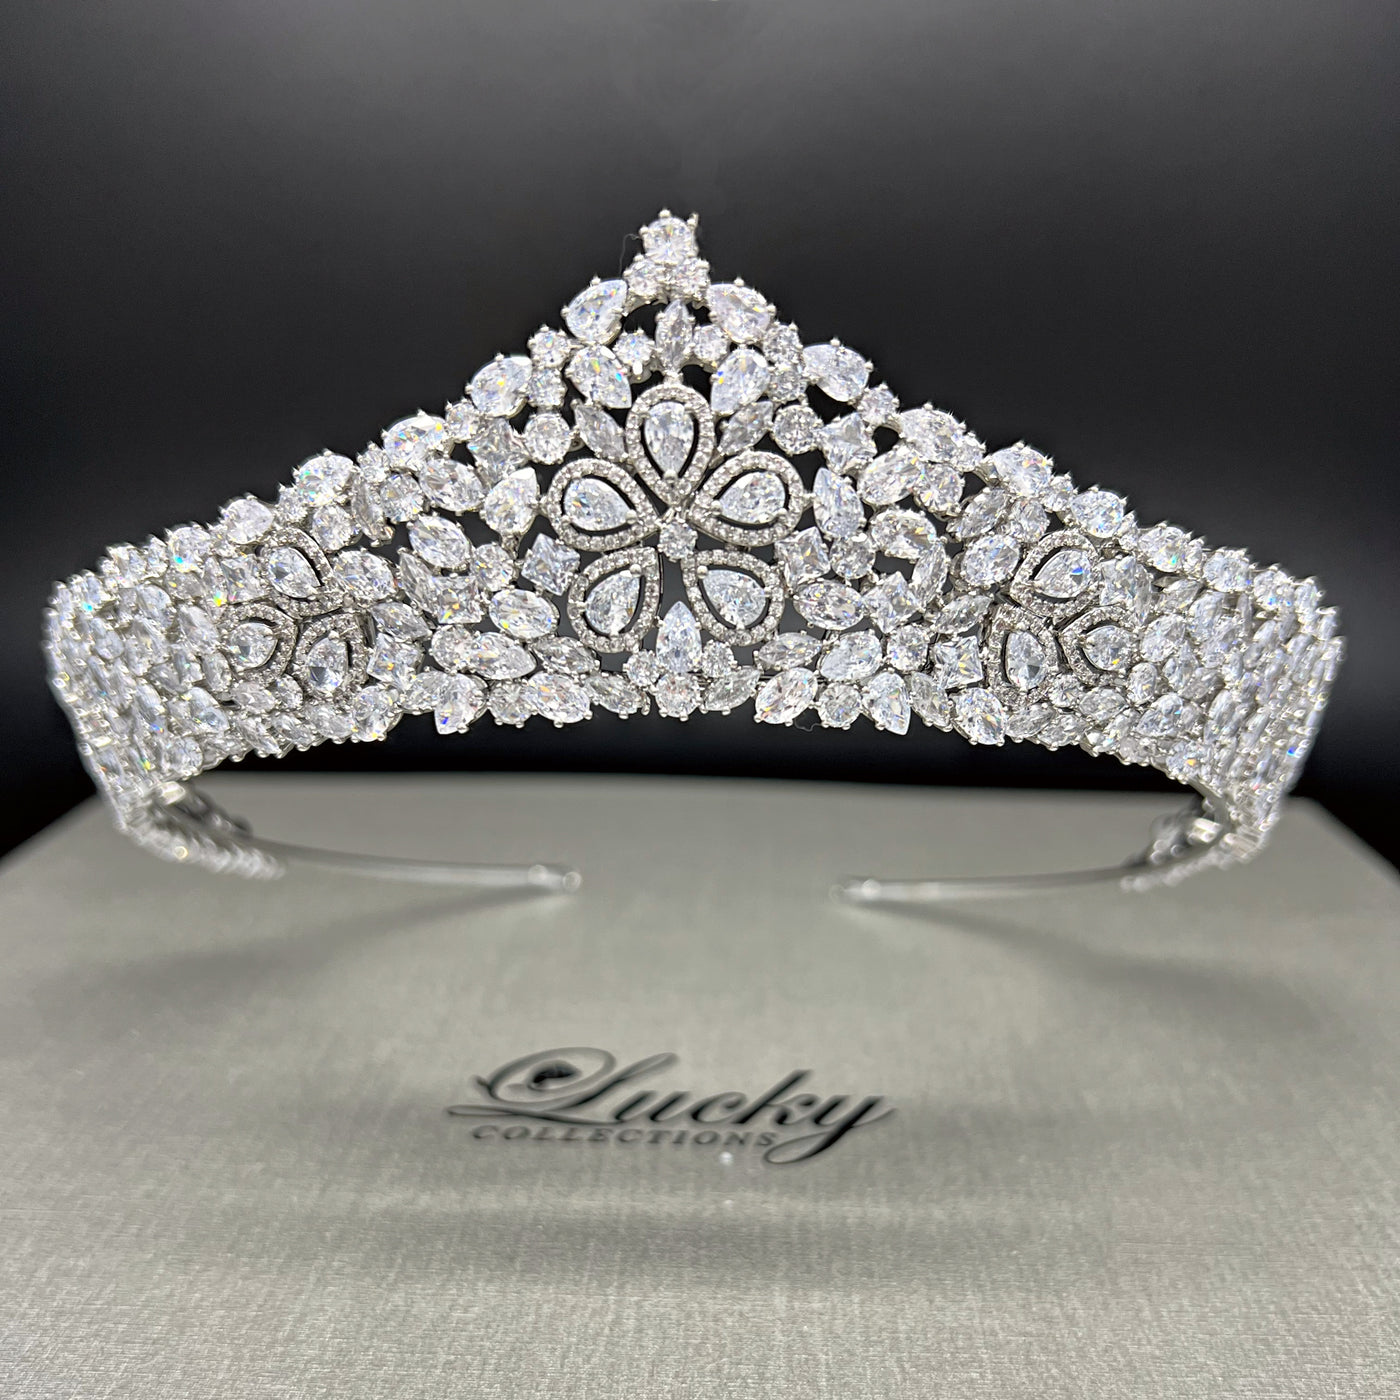 Bridal Tiara, Zirconia, Peak & Central Flower by Lucky Collections ™